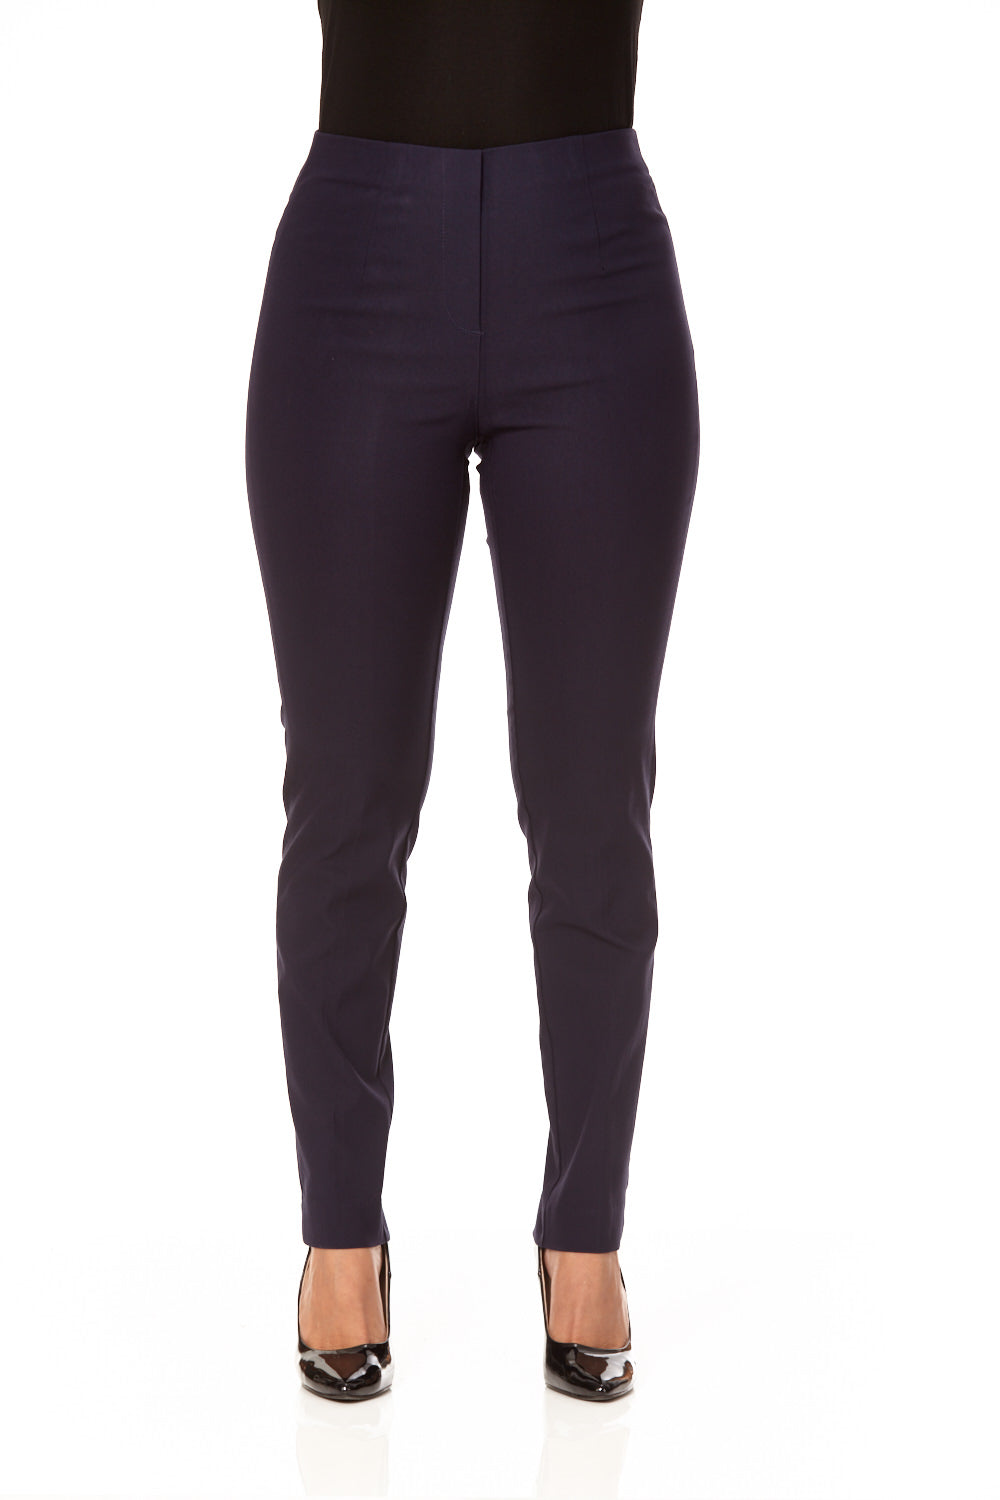 Women Relaxed Fit Colorful and Tapered Leg Cut Pull On Dress Pants